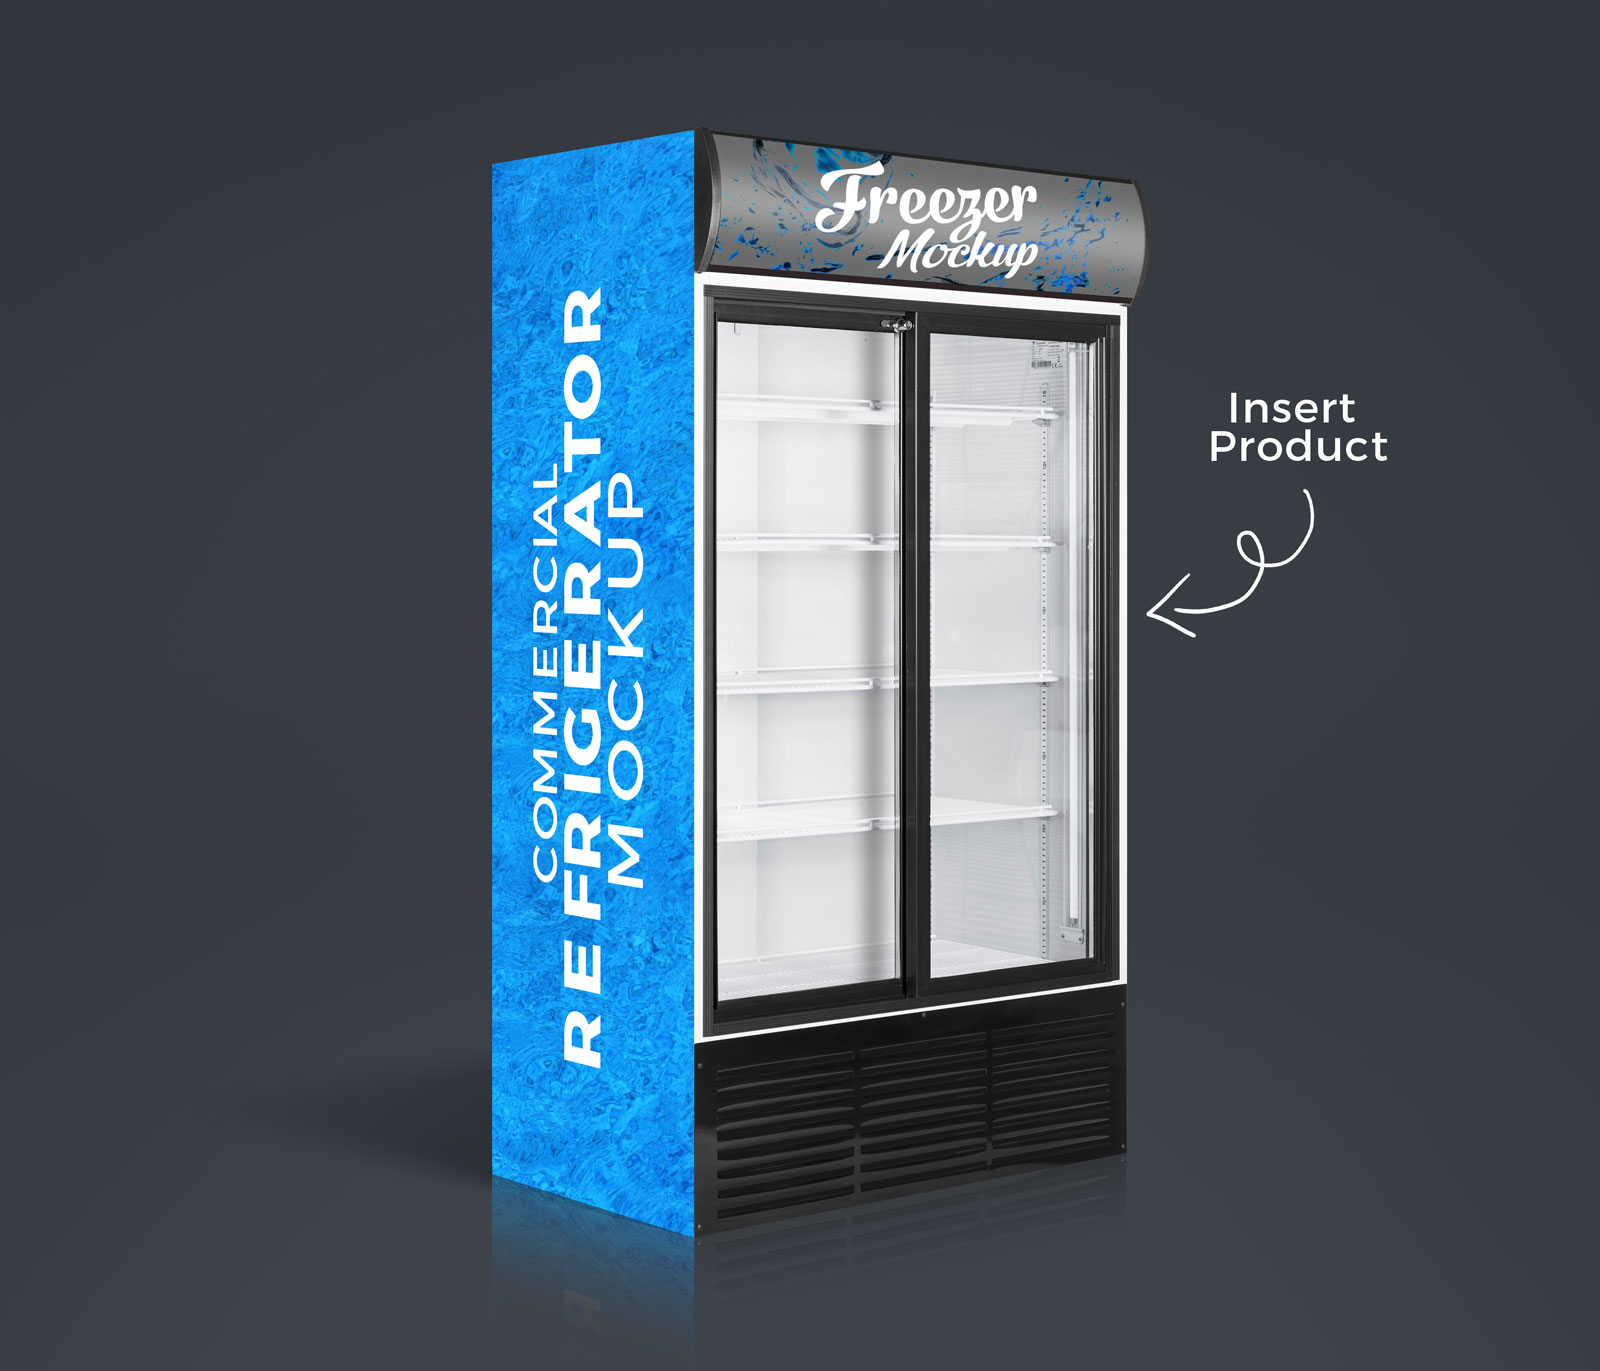 Commercial Refrigerator, Cooler / Freezer Mockup with Product Insertion